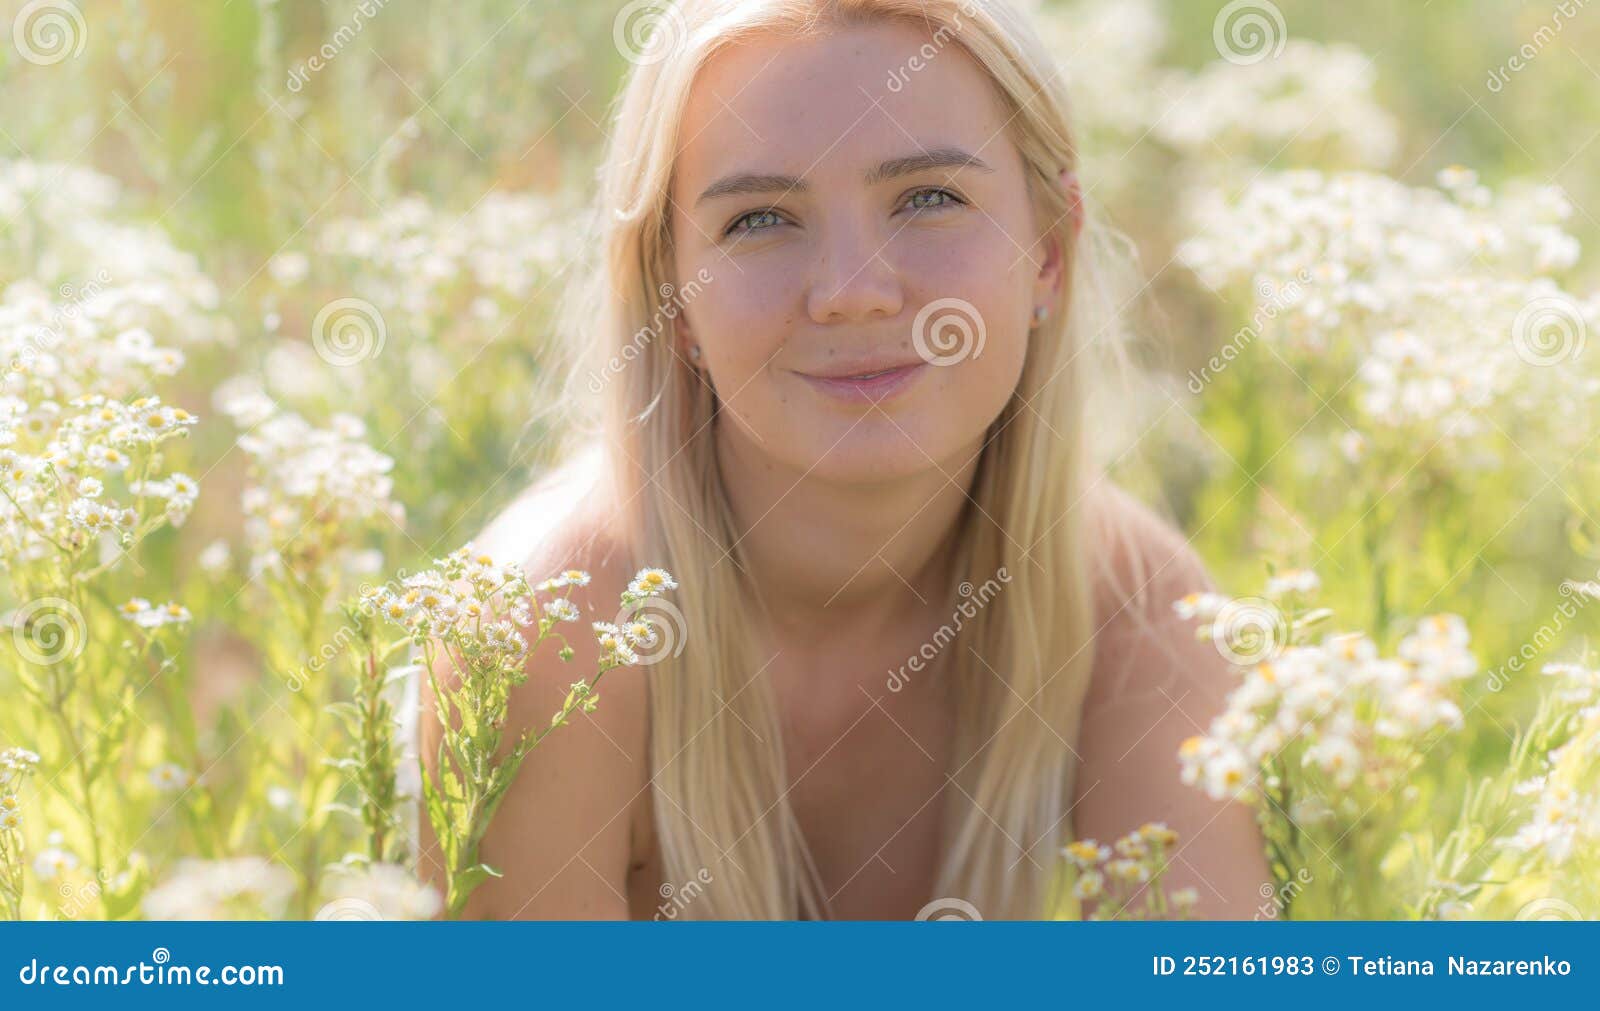 Cute Blonde Girl With Fresh Skin Outdoor Portrait Stock Image Image